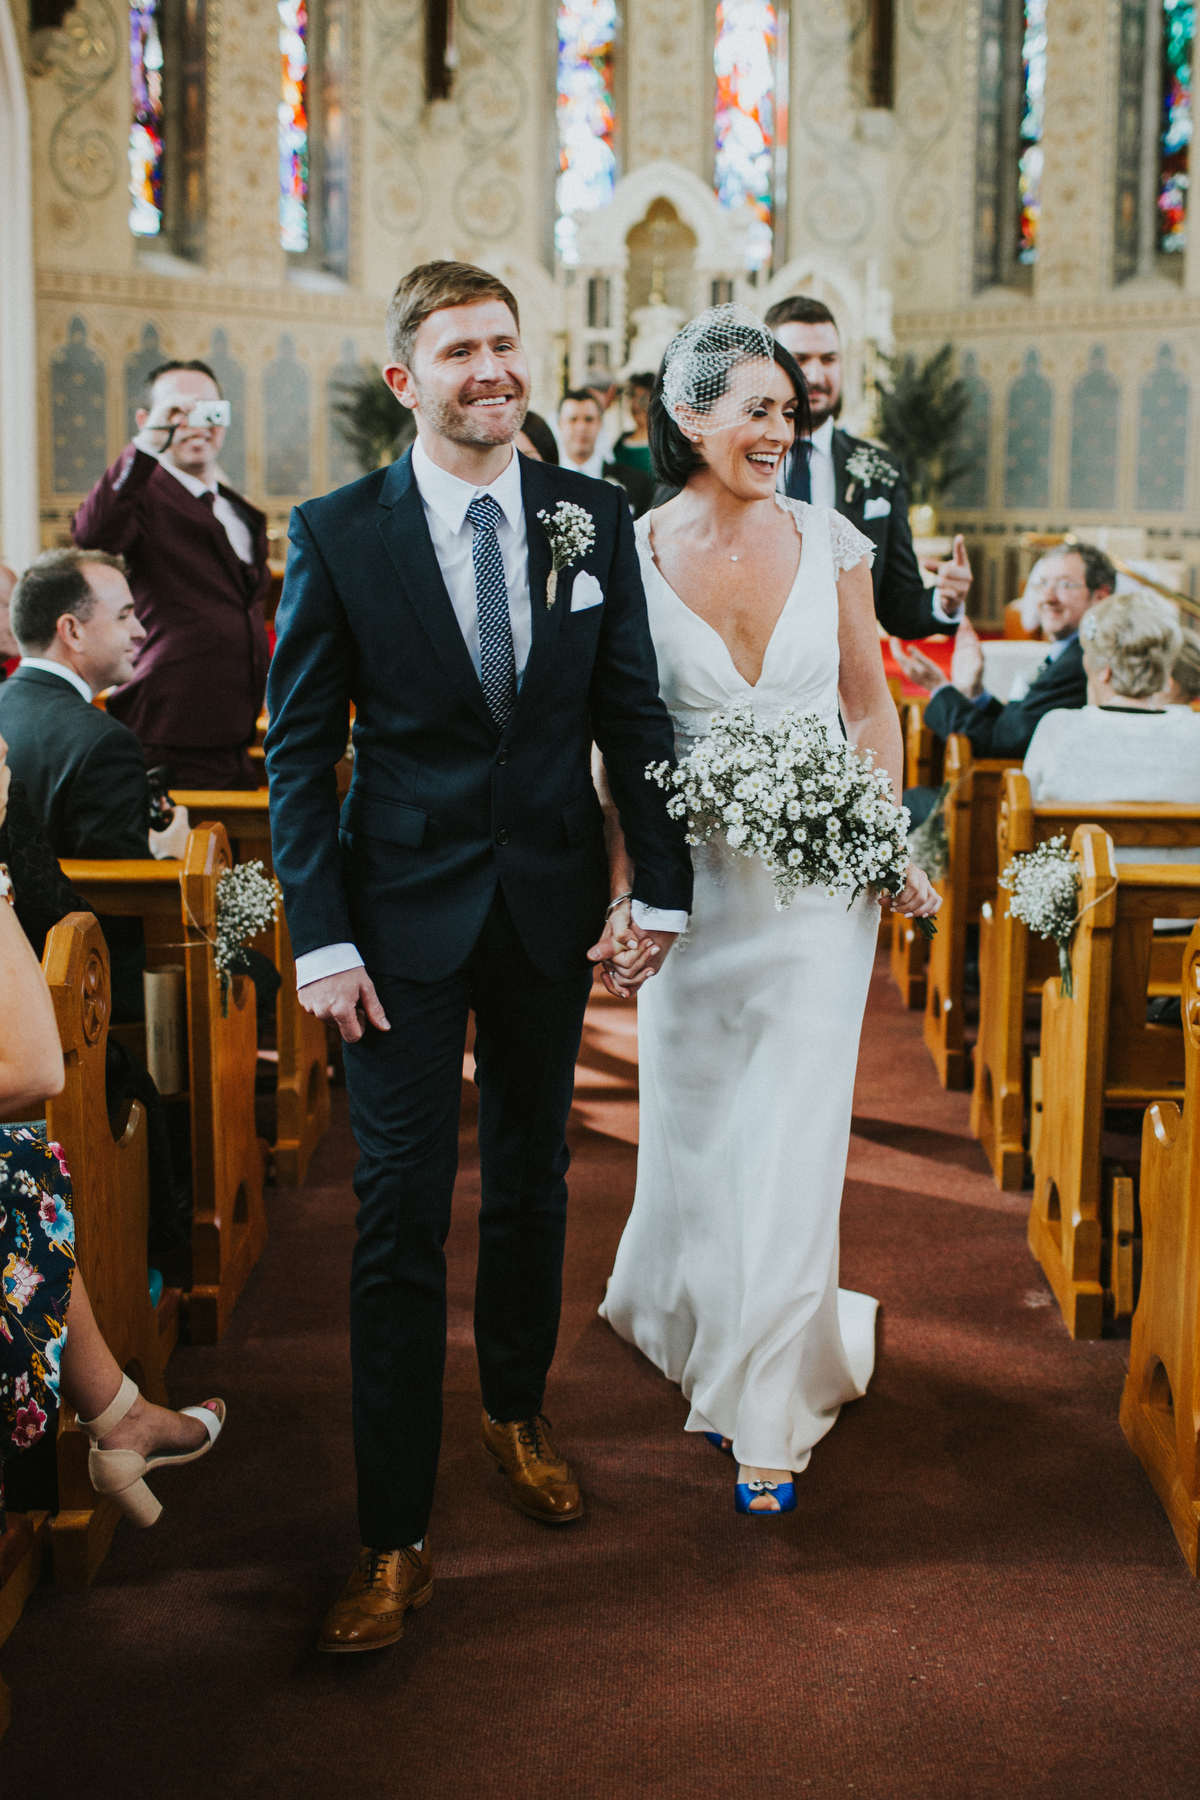 Maria and Jon's alternative wedding at Mount Druid photographed by Rubistyle.